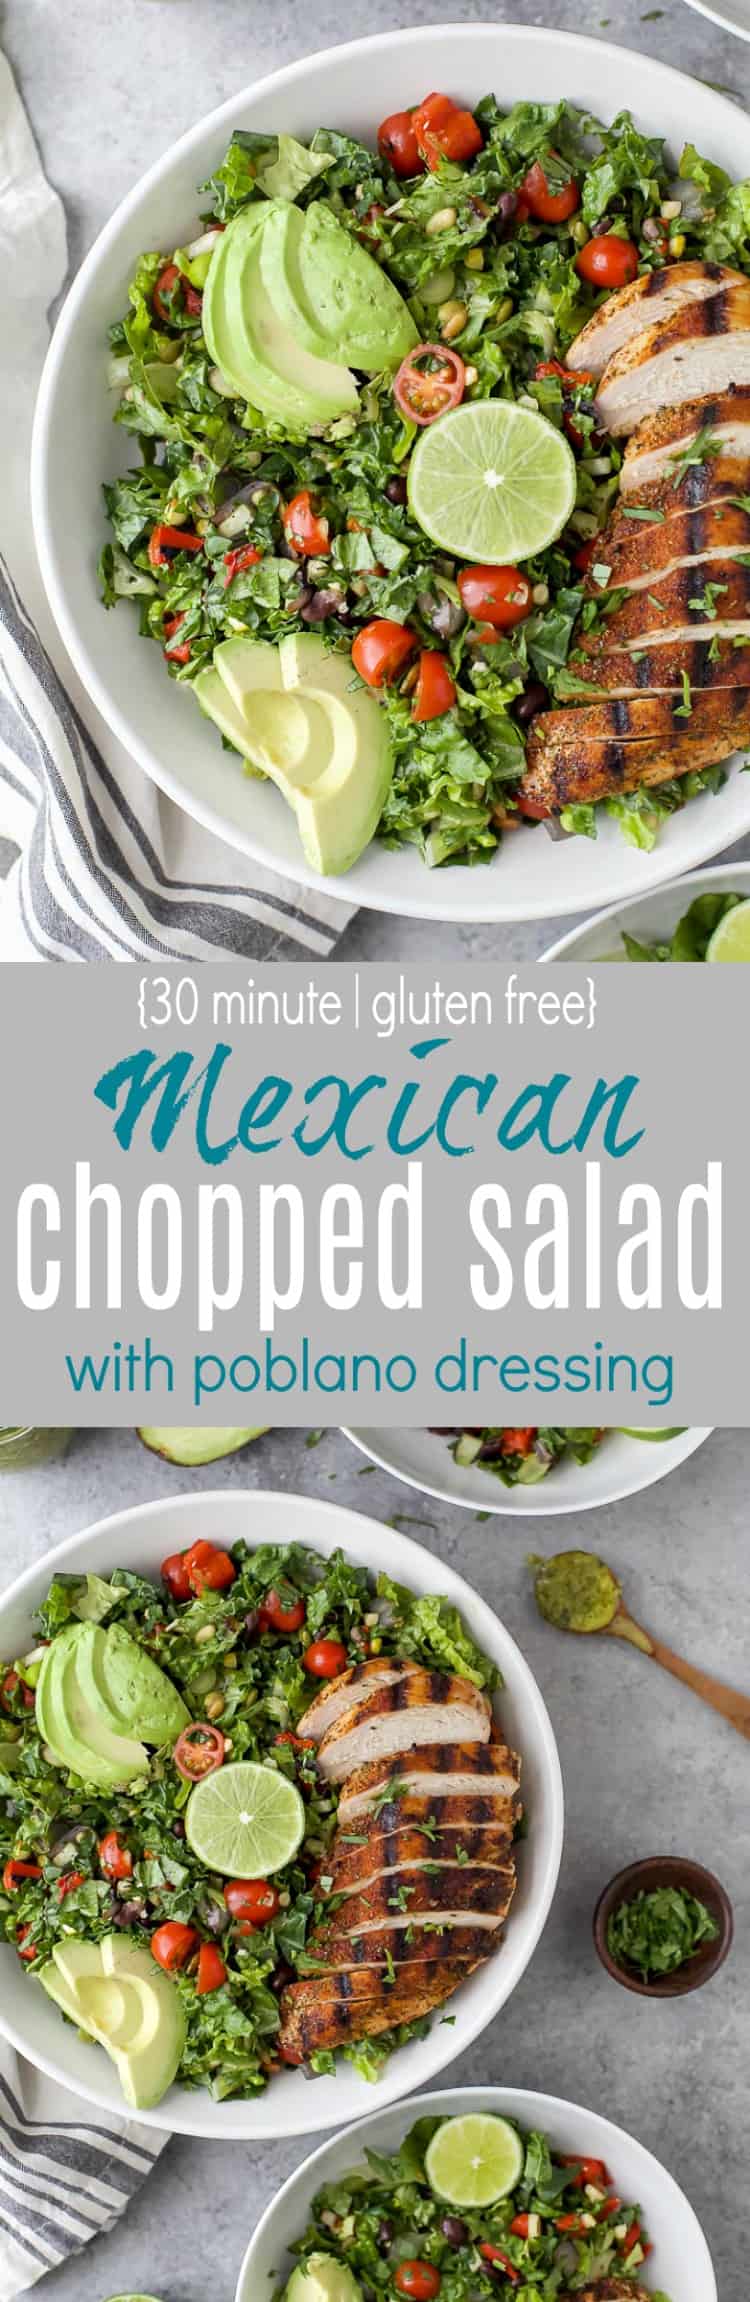 Chopped Salad with Grilled Chicken and Poblano Dressing photo collage